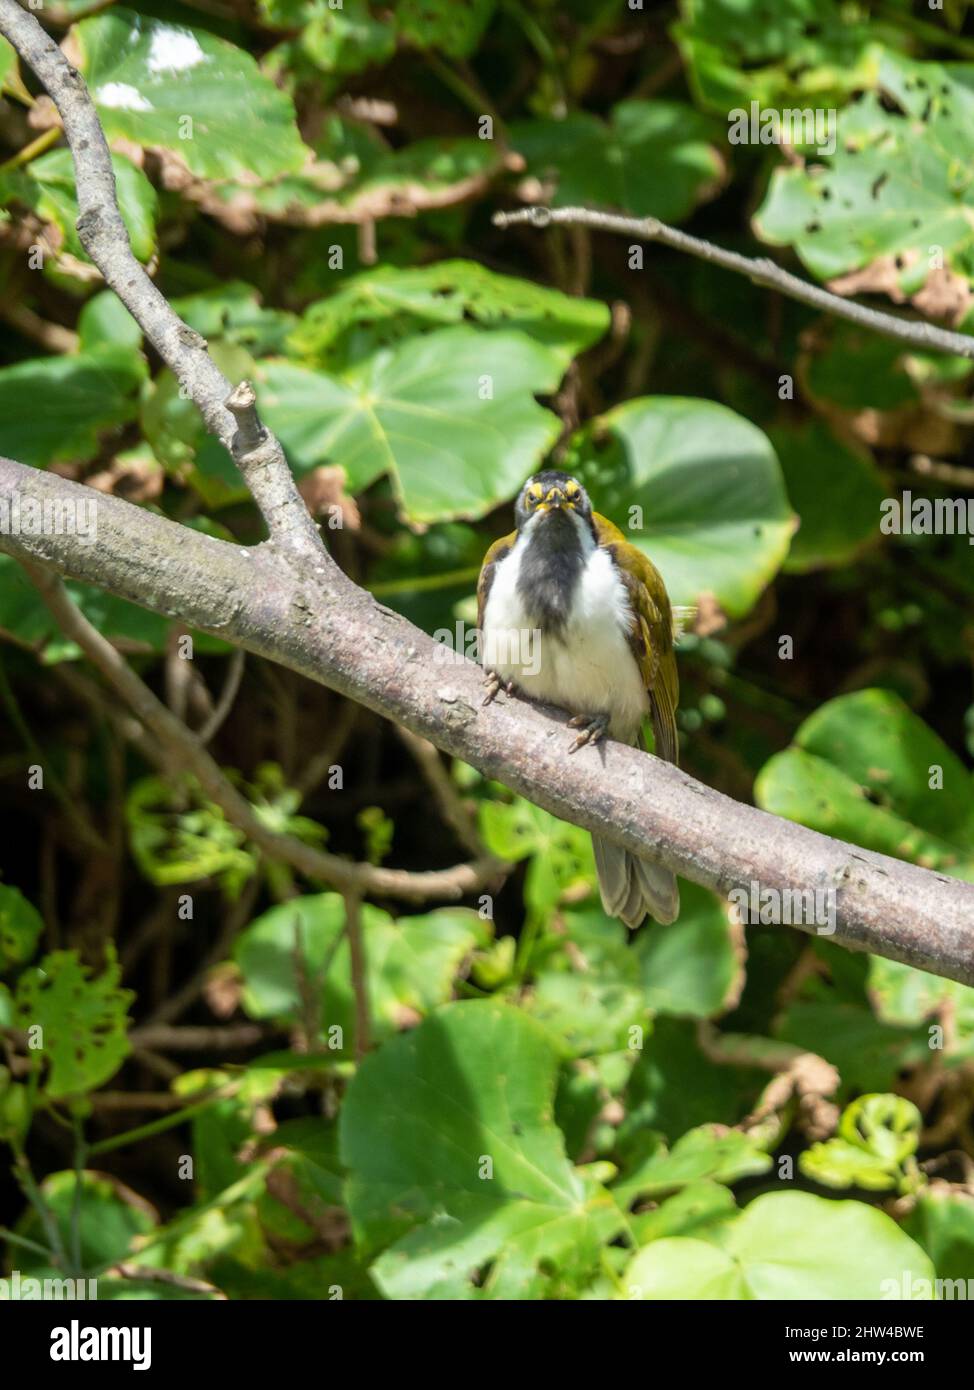 A Blue-Faced Honeyeater bird perched neatly on a branch staring into the camera, looks cross, green leaves behind, sub tropical coastal garden Stock Photo